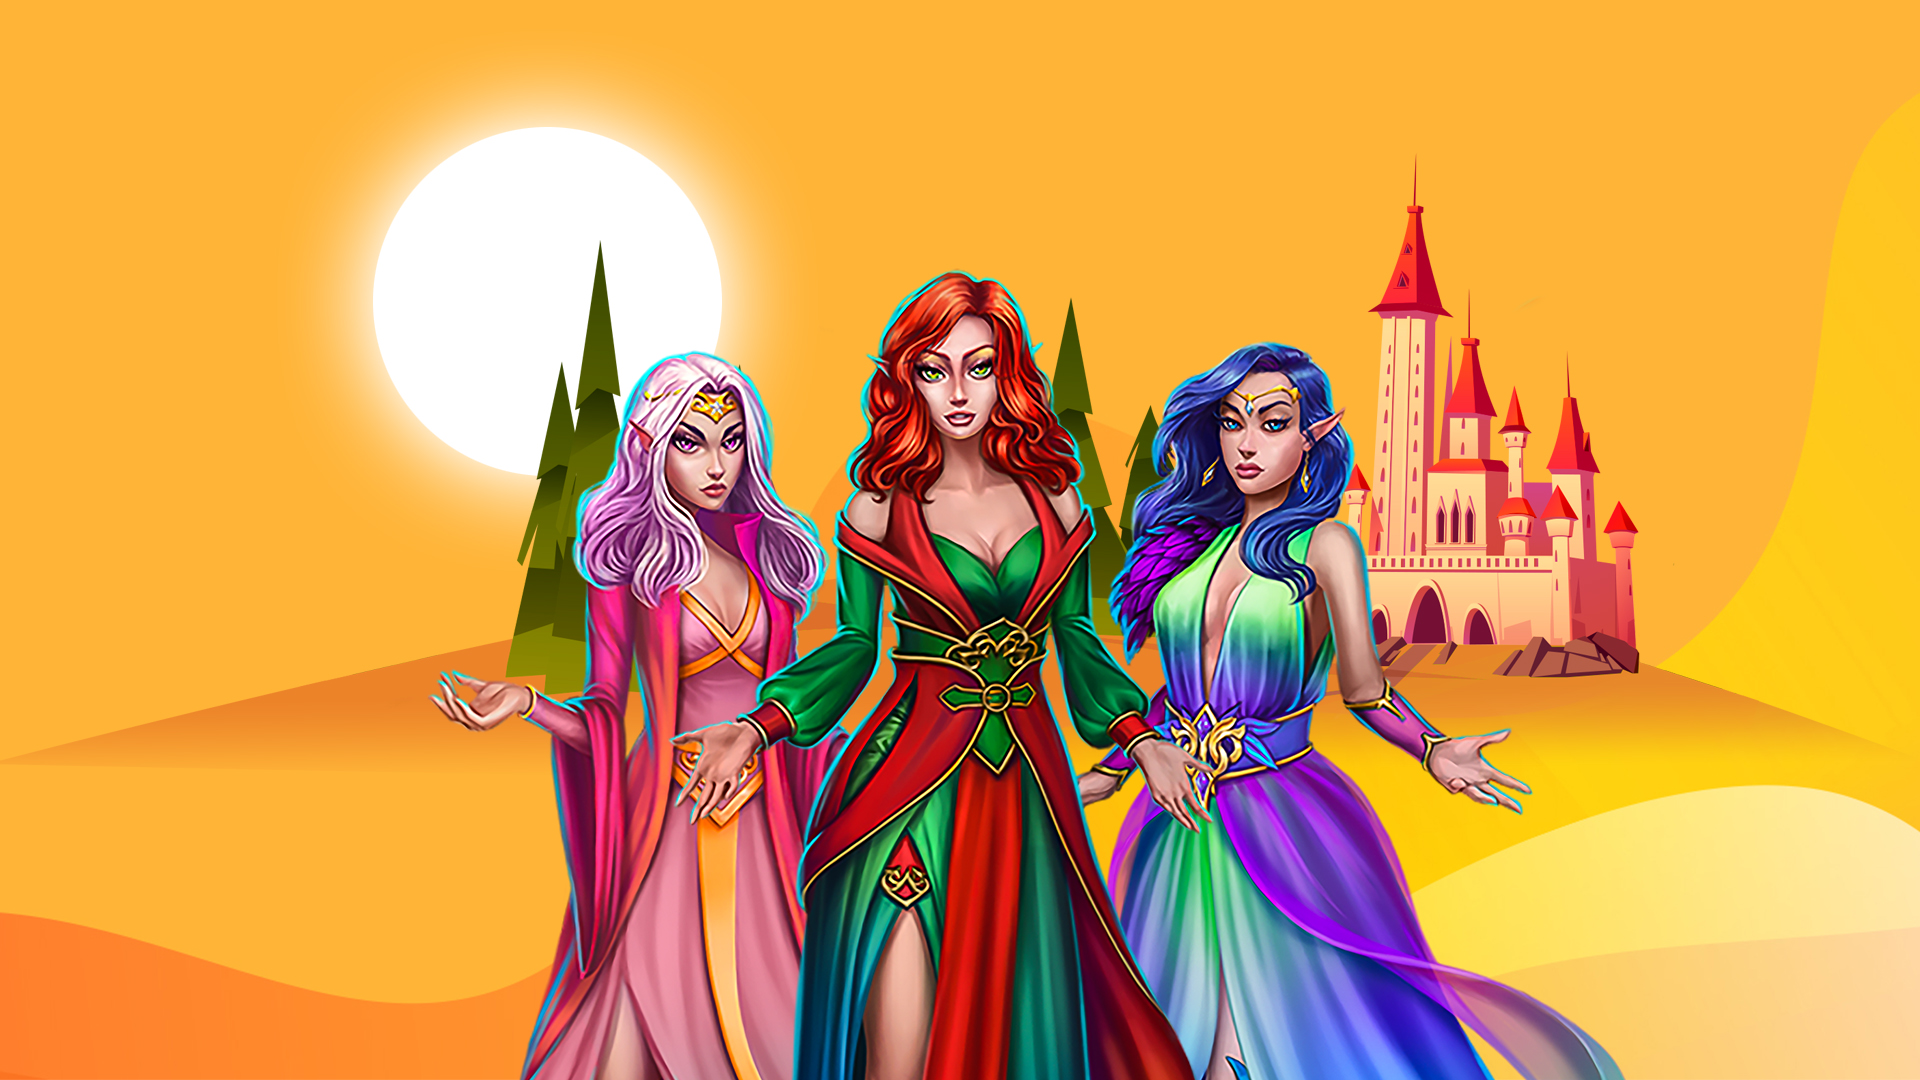 Three enchanted fairies from the SlotsLV slots game Fairy Wins, one with pink hair and dress, one with red hair and dress, and one with blue hair and dress, stand in front of an orange castle.